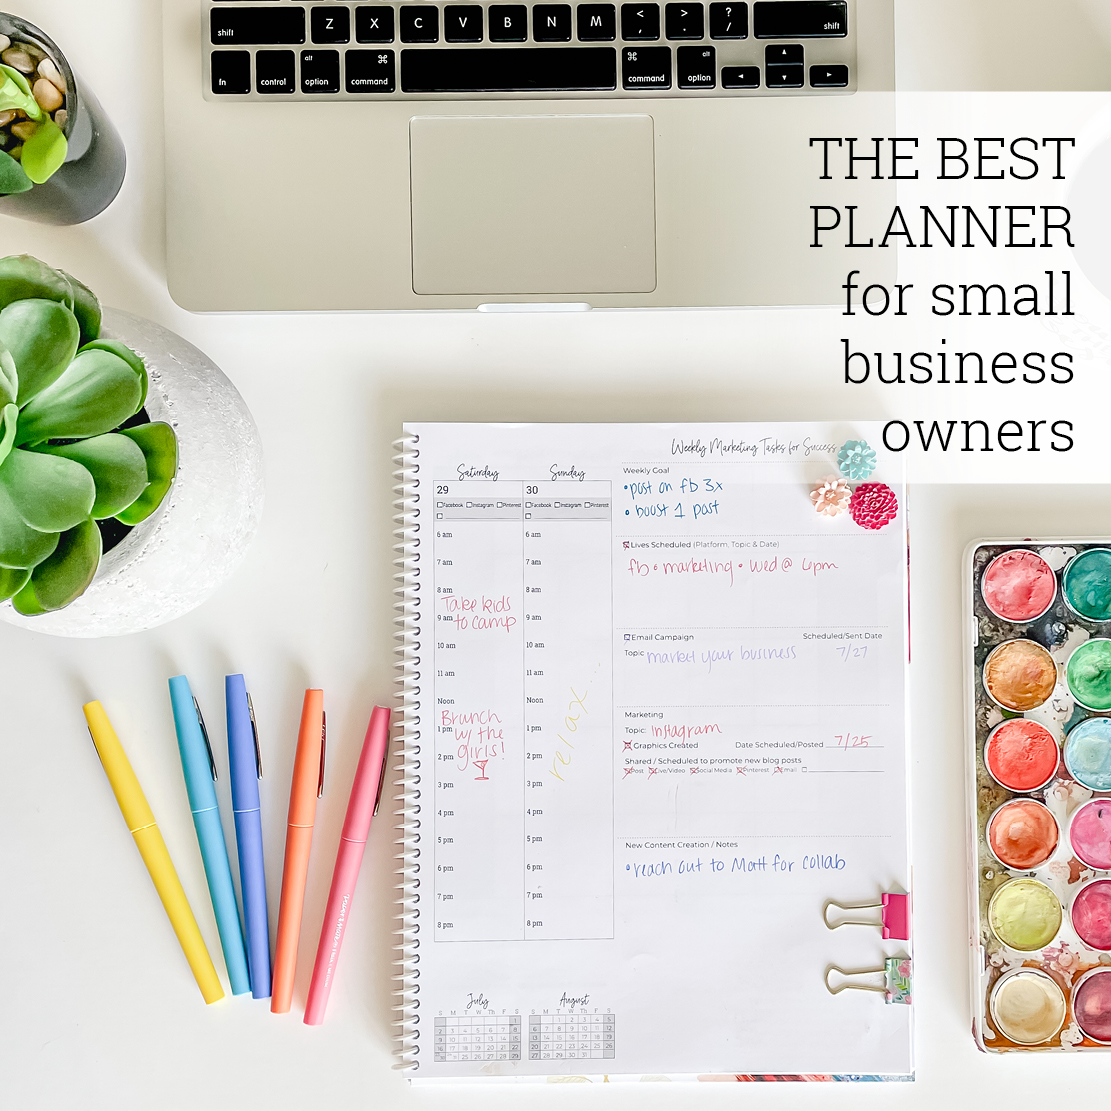 The Best Planner for Small Business Owners